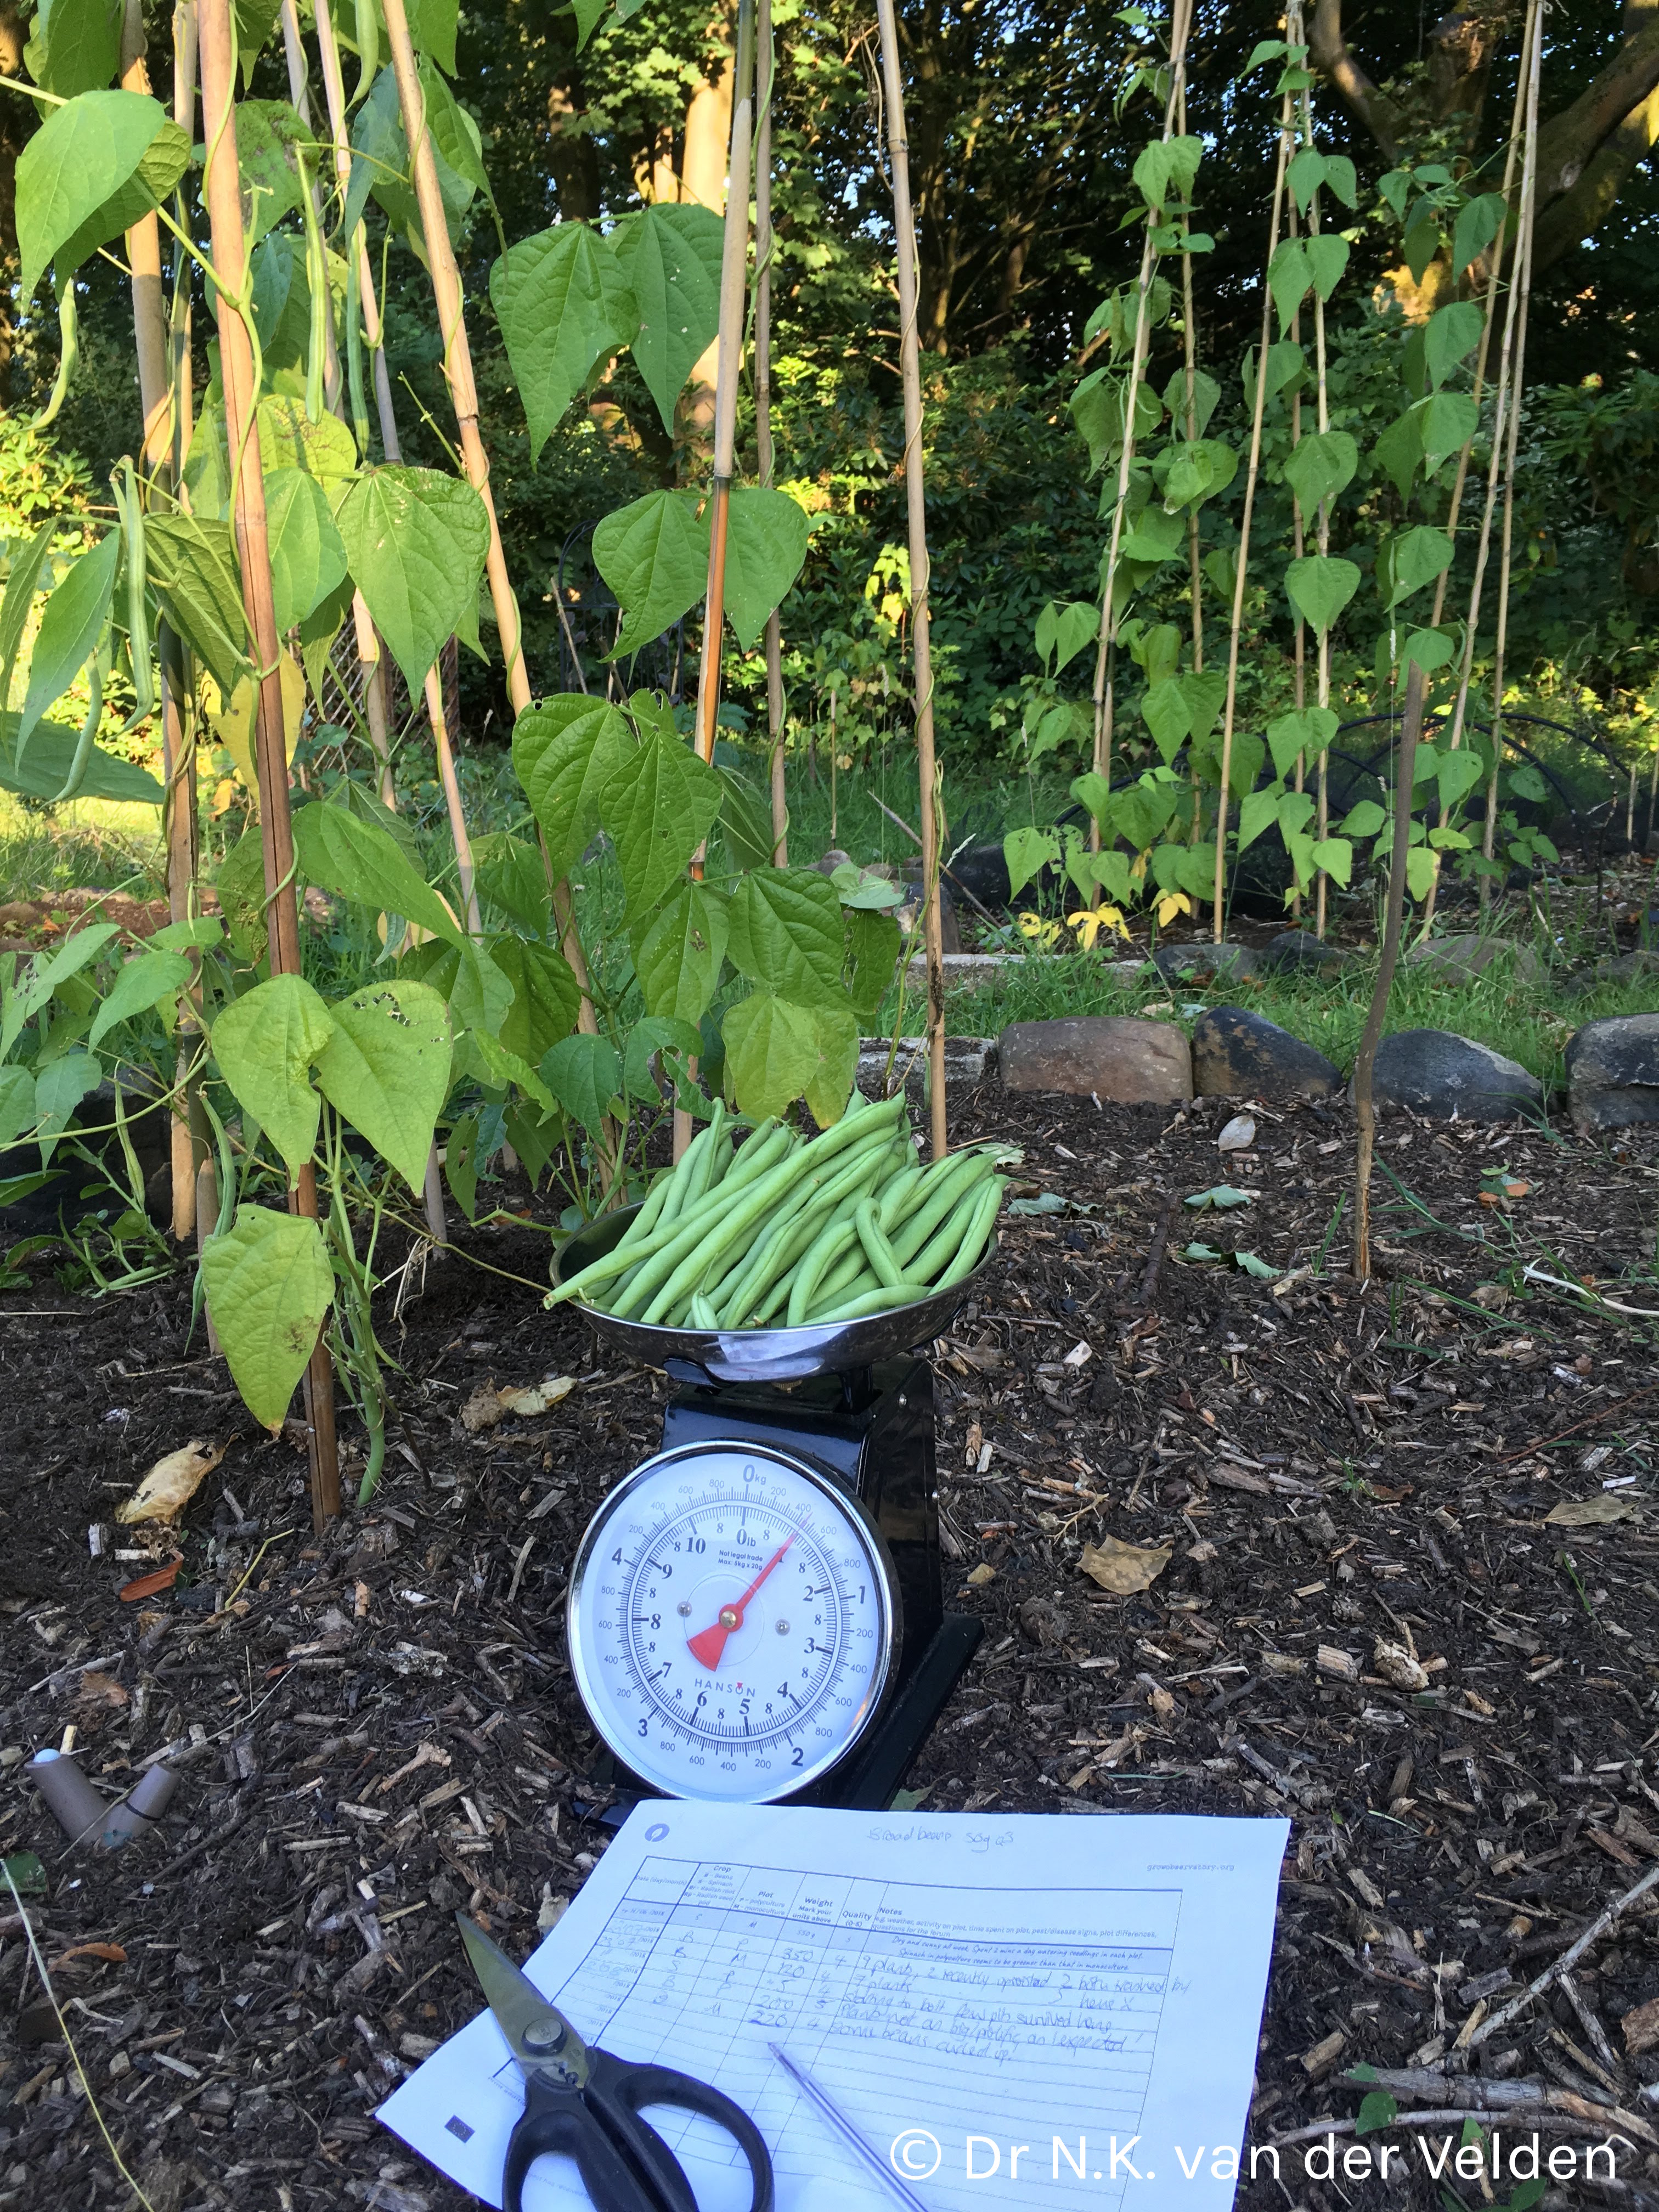 Scales and recording a harvest of beans in the garden